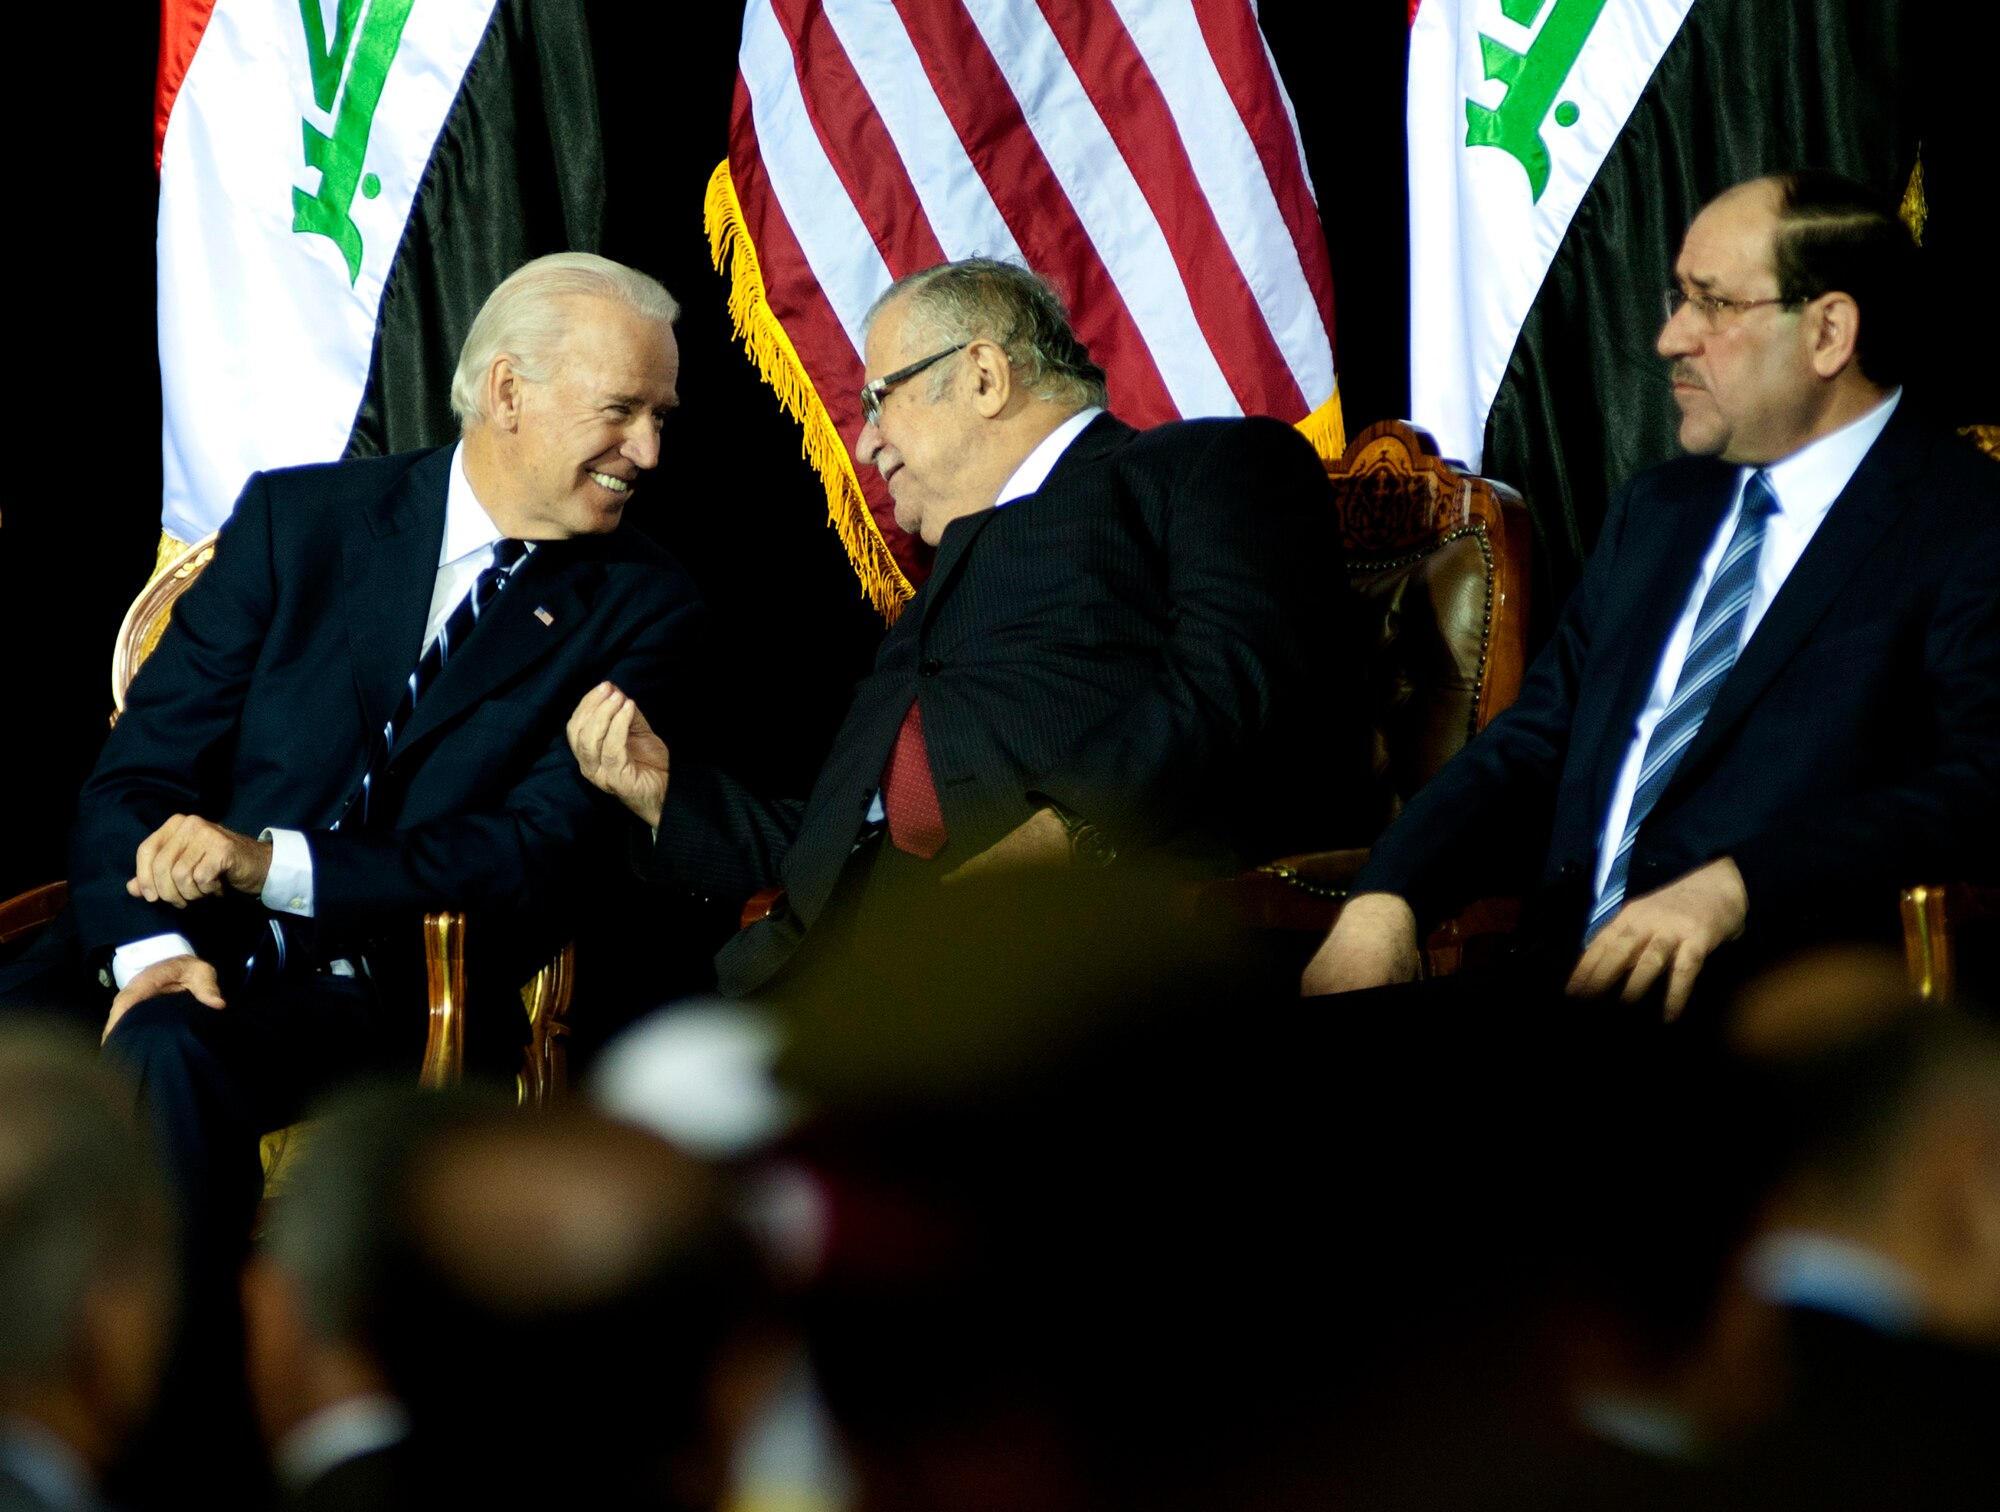 The Vice President of the United States, Joe Biden, talks to the President of Iraq, Jalal Talabani during the  Commitment Day ceremony in the Al Faw Palace at Victory Base Complex, Iraq, on Dec. 1, 2011. The Government of Iraq hosted the ceremony to commemorate the sacrifices and accomplishments of U.S. and Iraqi service members. (U.S. Air Force photo/Master Sgt. Cecilio Ricardo)